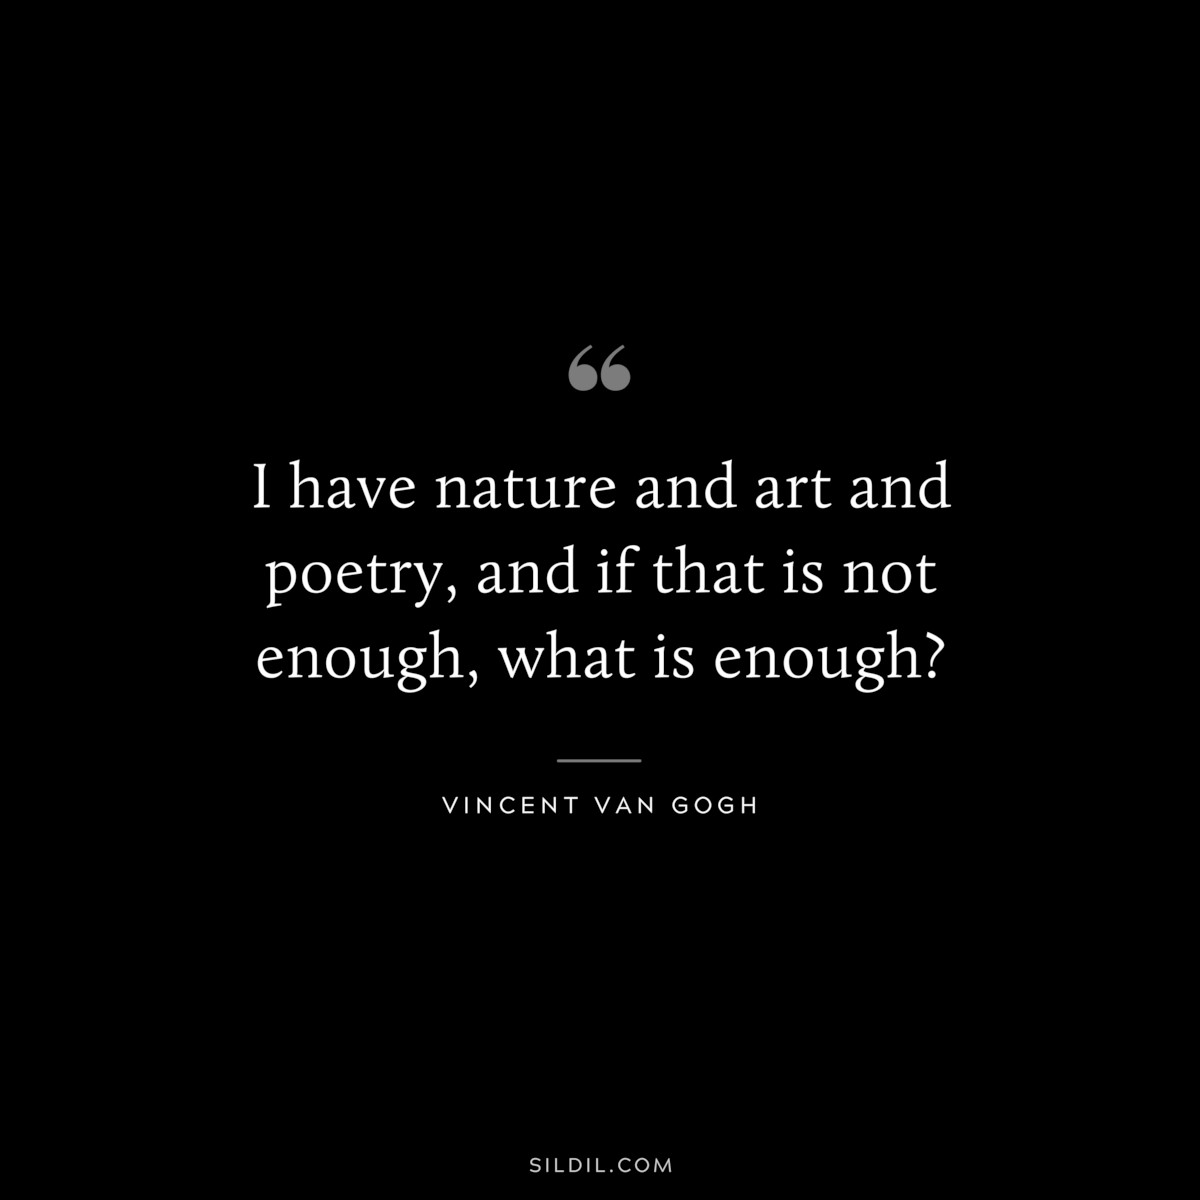 I have nature and art and poetry, and if that is not enough, what is enough? ― Vincent van Gogh